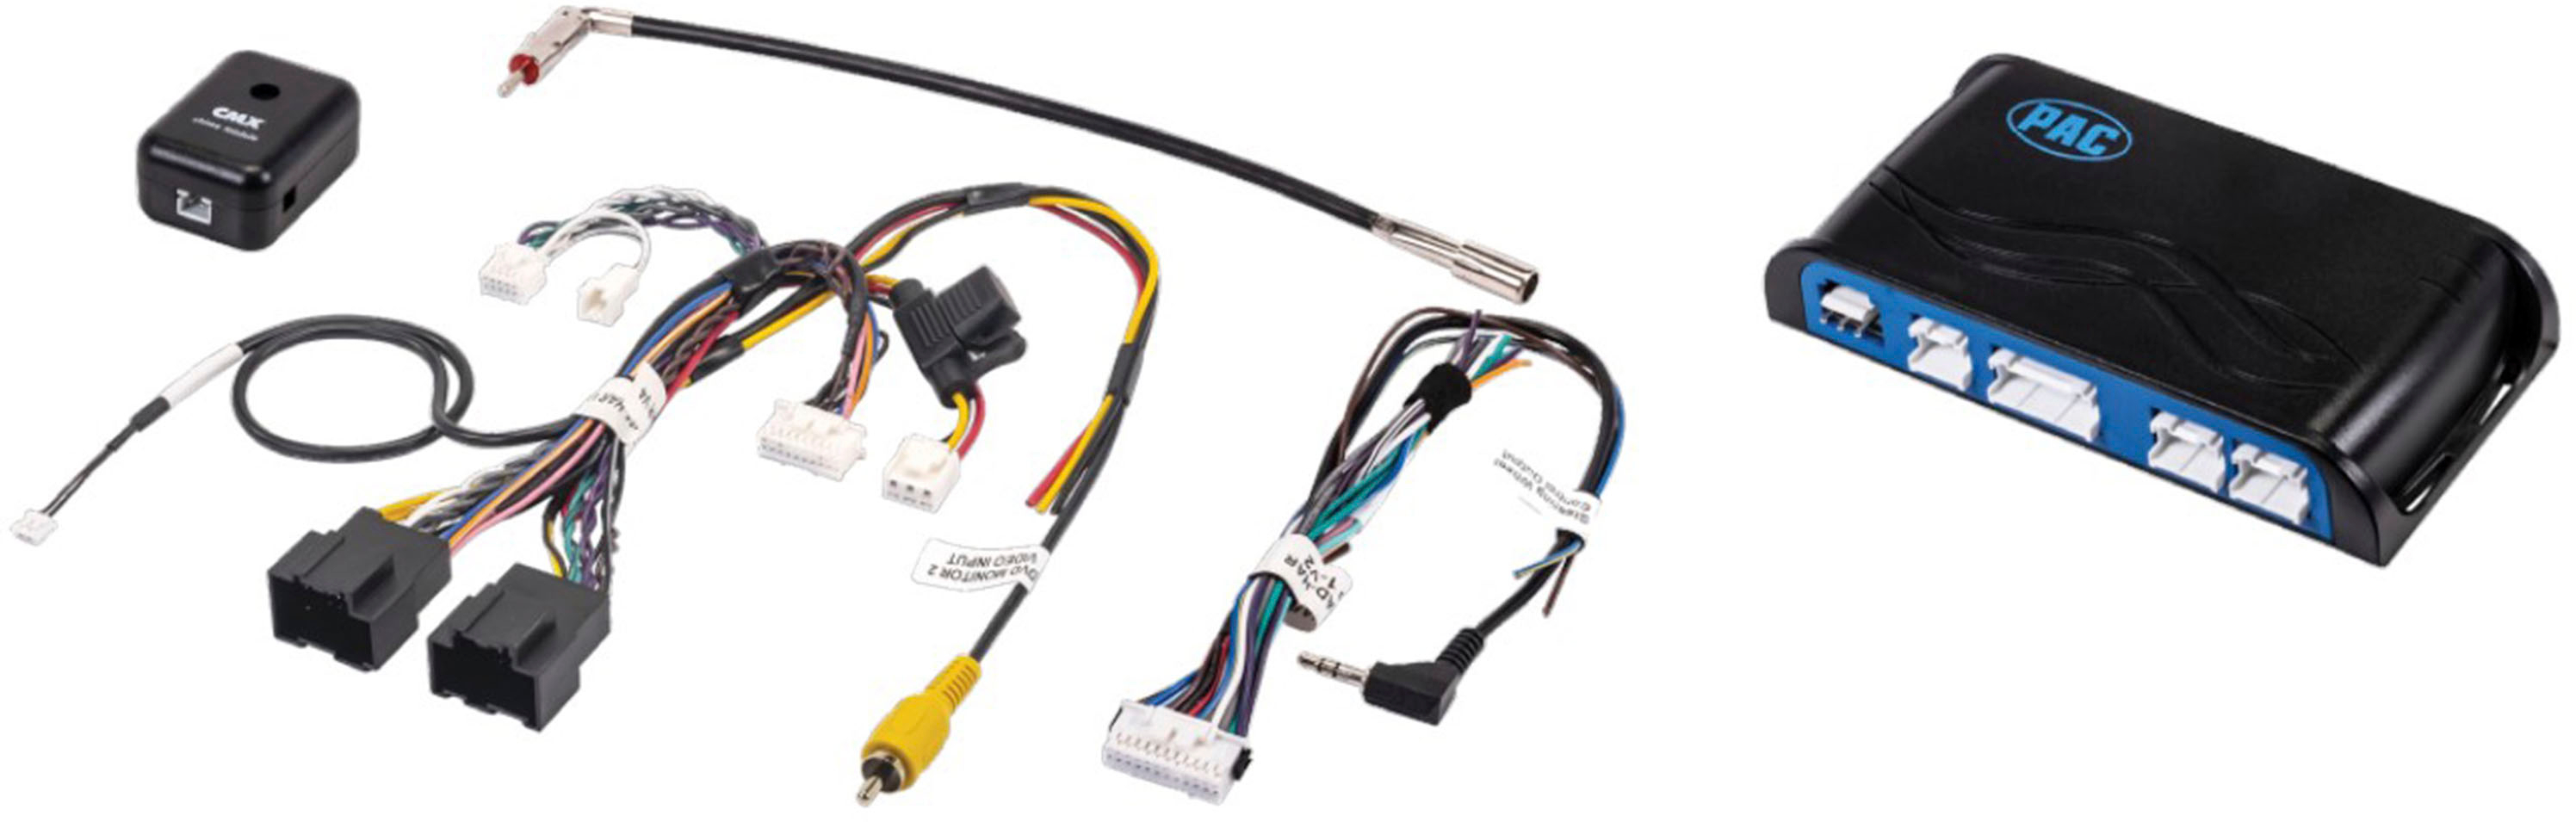 PAC RP5-GM11 Radio Replacement Wiring Interface for Select On-Star GM Vehicles 